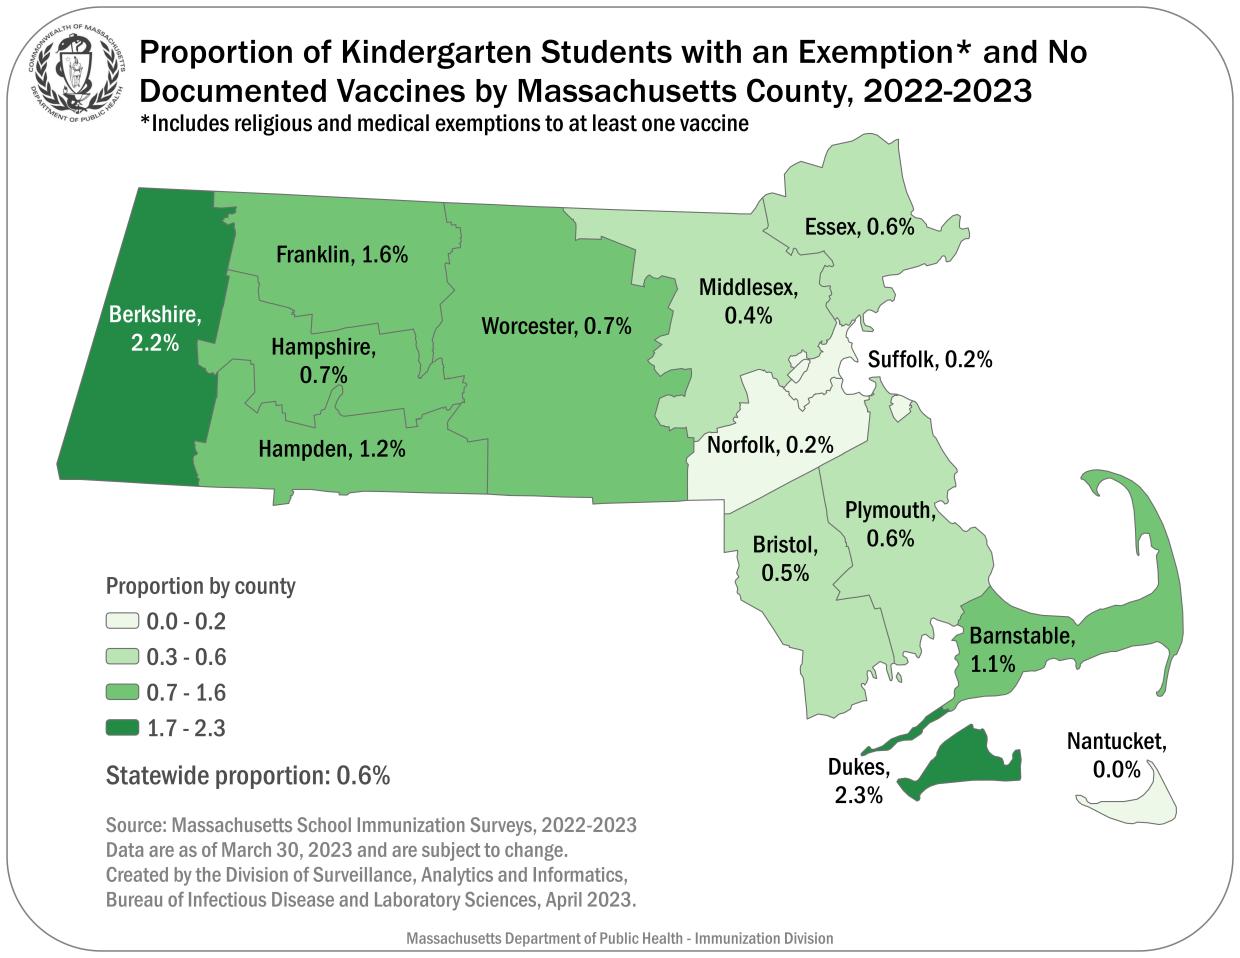 This map shows the proportion of Kindergarten Students by Massachusetts County with an Exemption and No Vaccines, 2022-2023. These are religious and medical exemptions combined. These data are current as of March 30, 2023 and are subject to change. The source of these data is via the Massachusetts School Immunization Surveys 2022-2023. State average 0.6% Barnstable 1.1% Berkshire 2.2% Bristol 0.5% Dukes 2.3% Hampden 1.2% Hampshire 0.7% Essex 0.6% Franklin 1.6% Middlesex 0.4% Nantucket 0.0% Norfolk 0.2% Plymouth 0.6% Suffolk 0.2% Worcester 0.7%